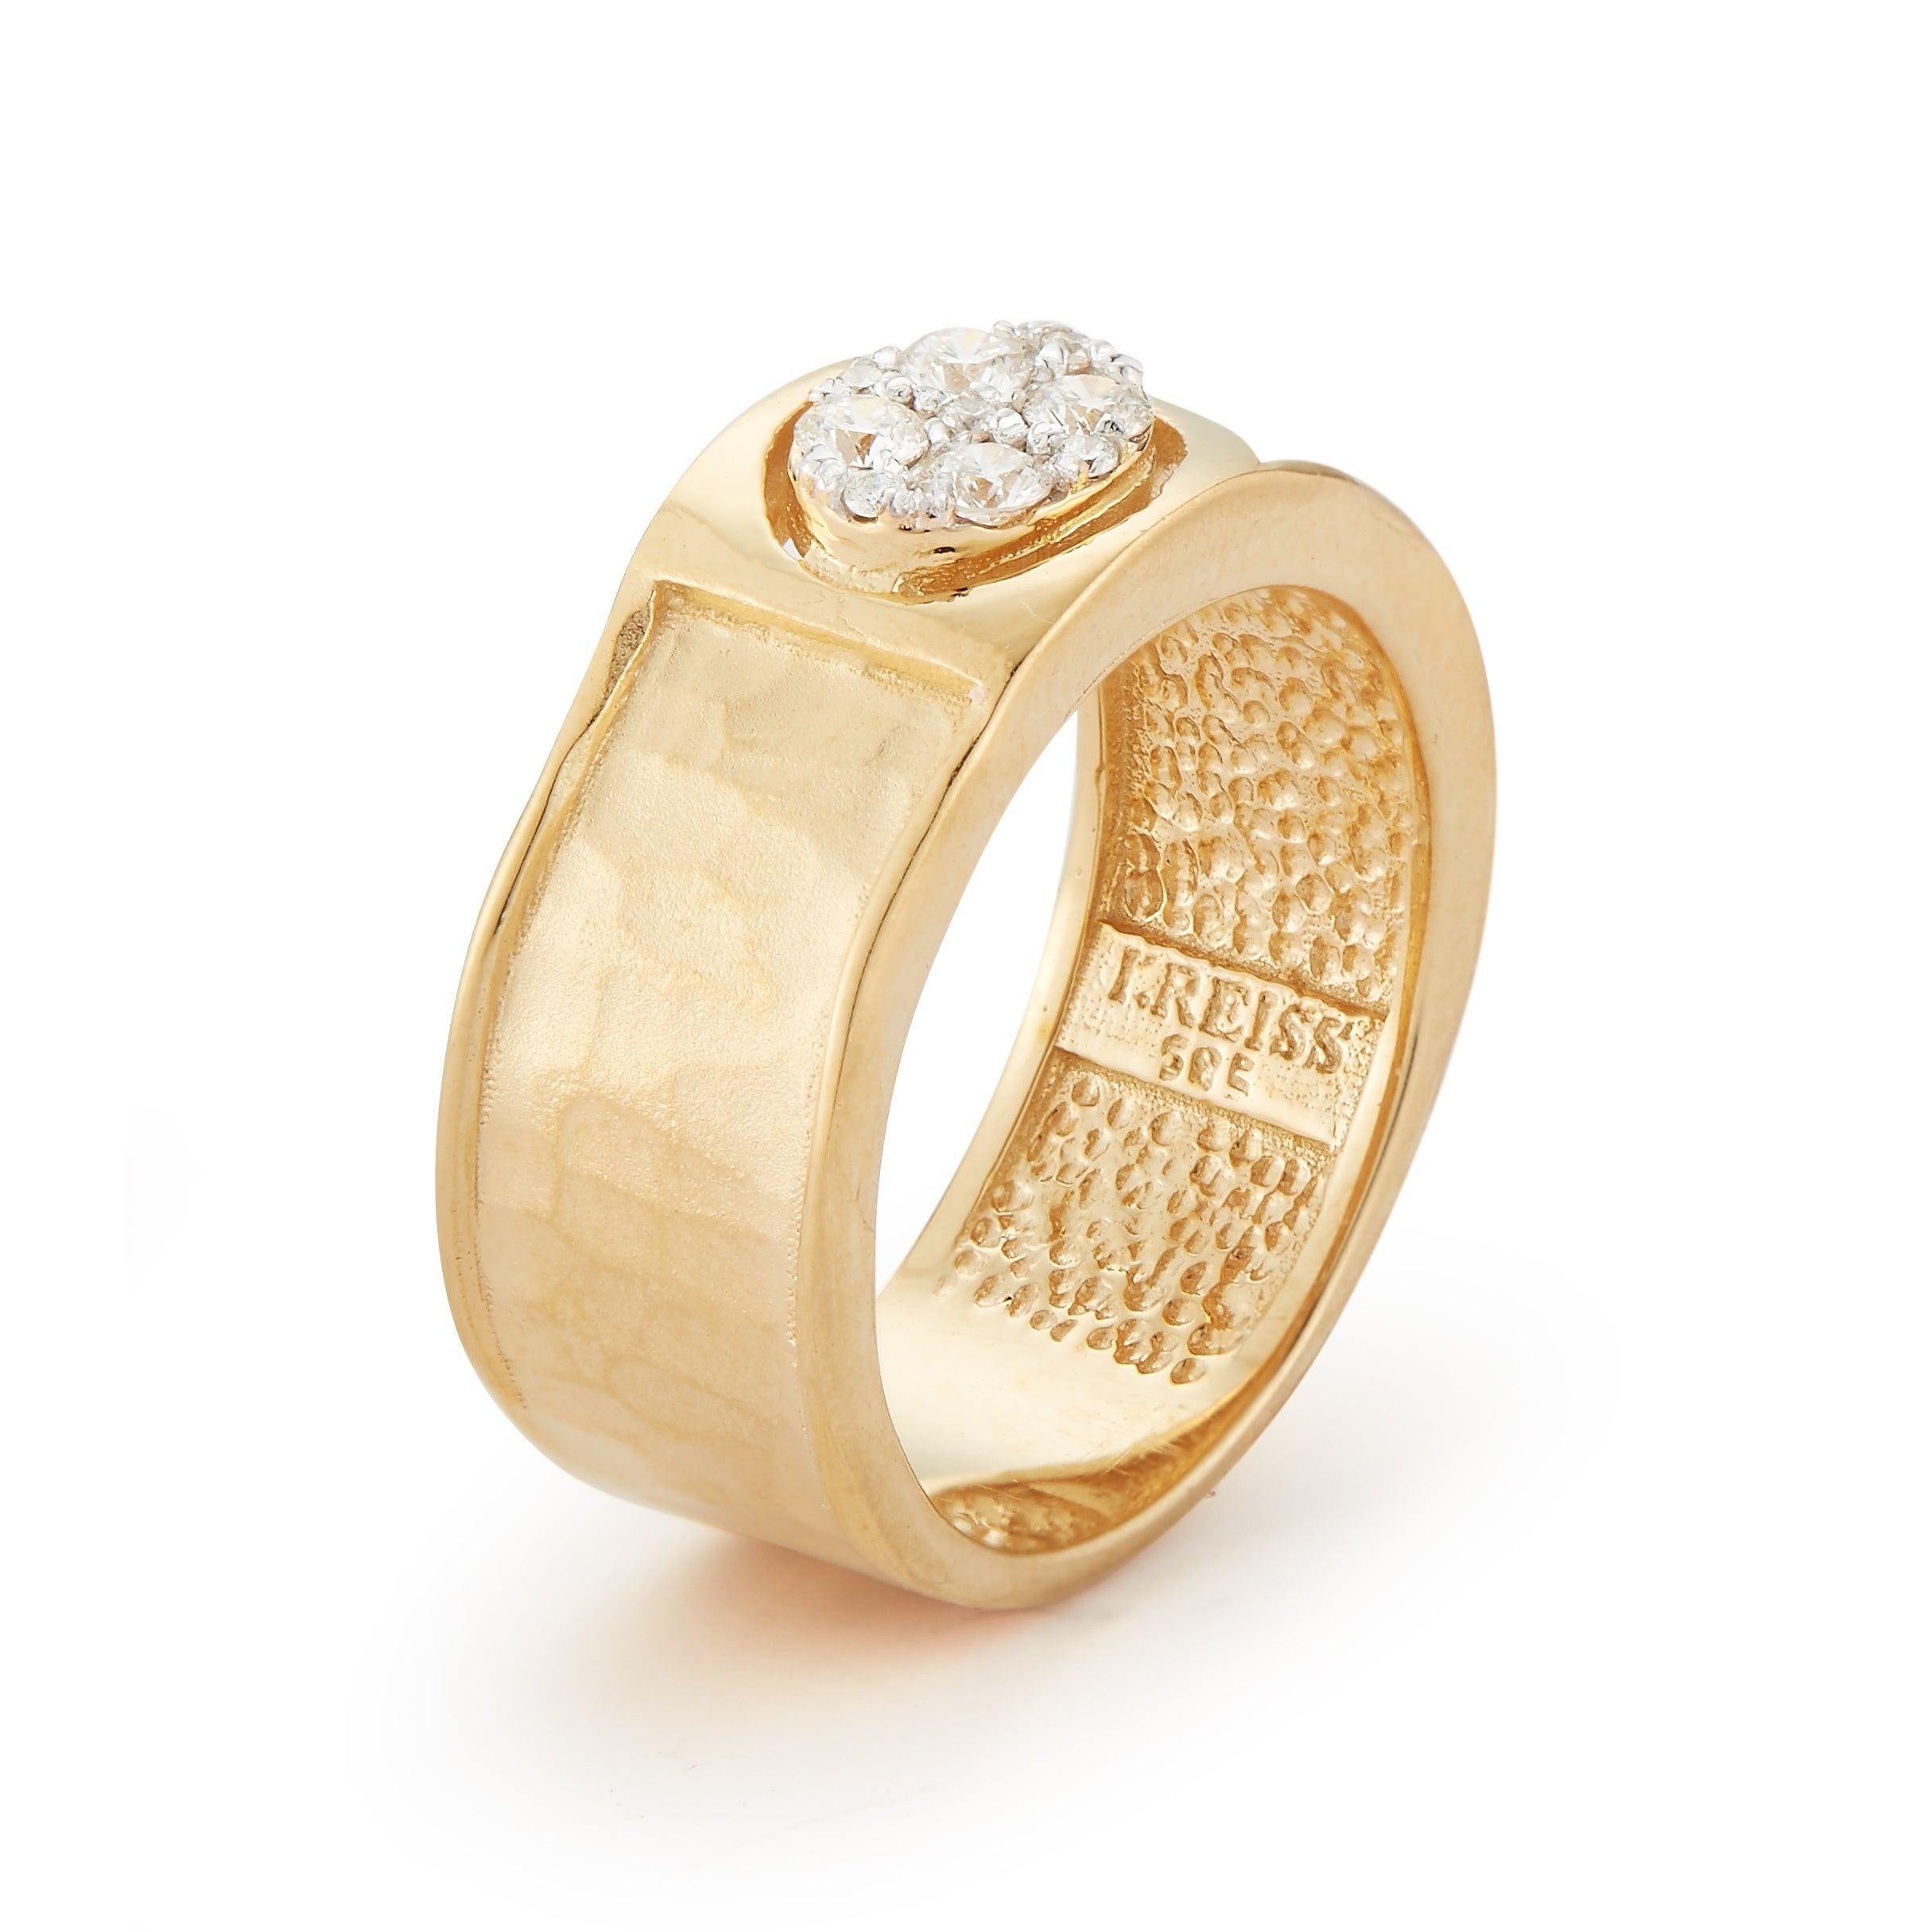 For Sale:  Handcrafted 14 Karat Yellow Gold Hammered Ring with an Oval Diamond Motif 2